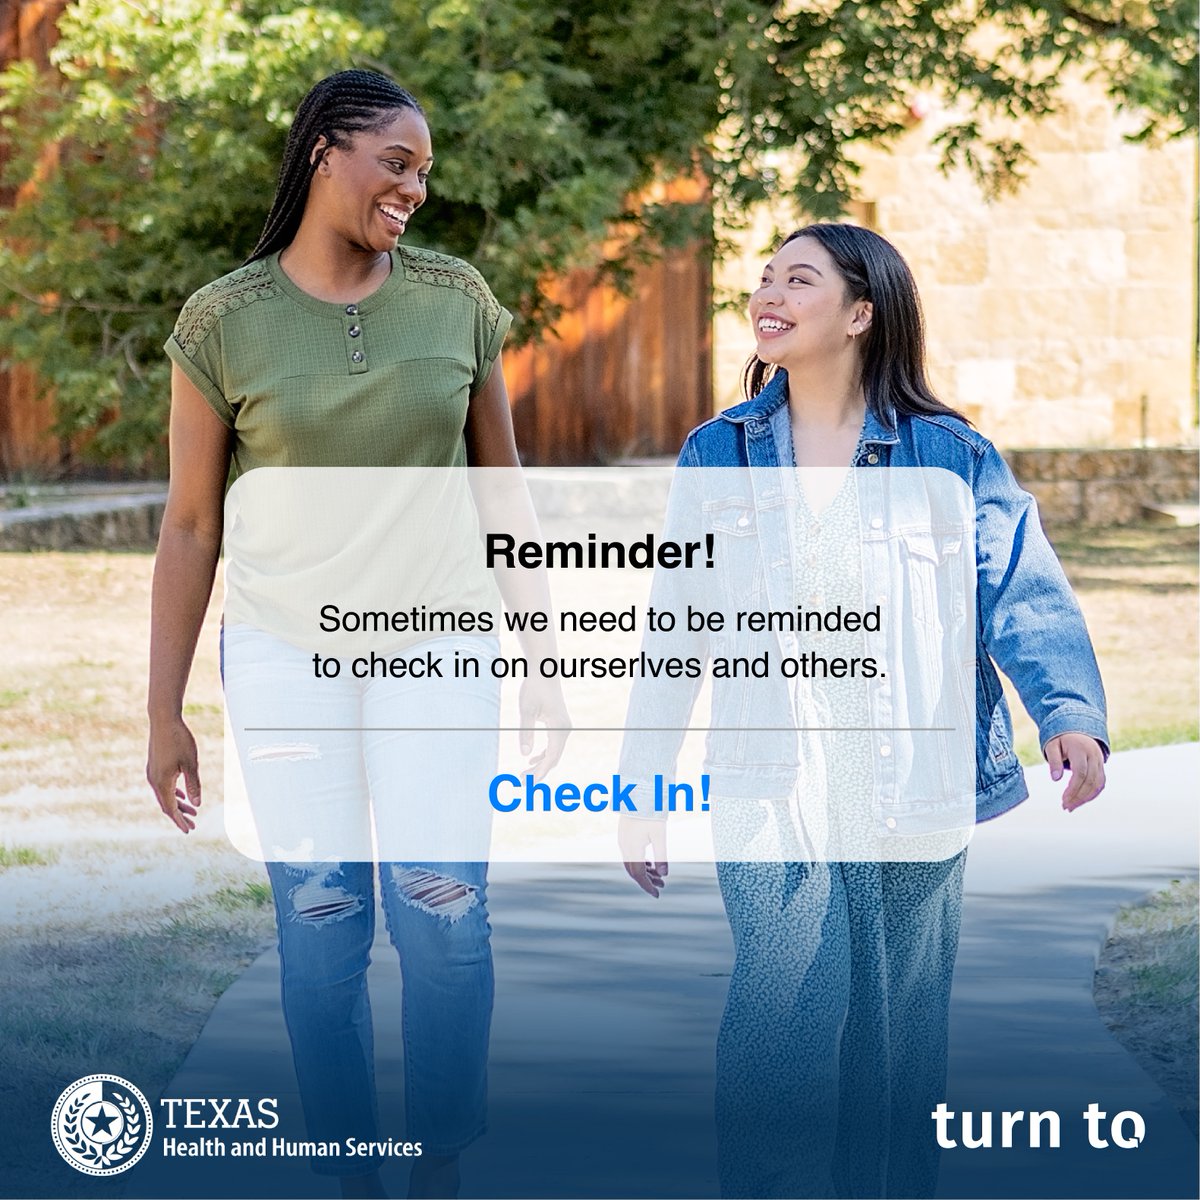 We all get stressed, lonely and sad. Emotions are a big part of living life. Consider taking 5 minutes to use the #TurnTo Check-In tool to better understand what may be impacting your mood. 

For helpful resources, visit: TurnToSupportsTX.org